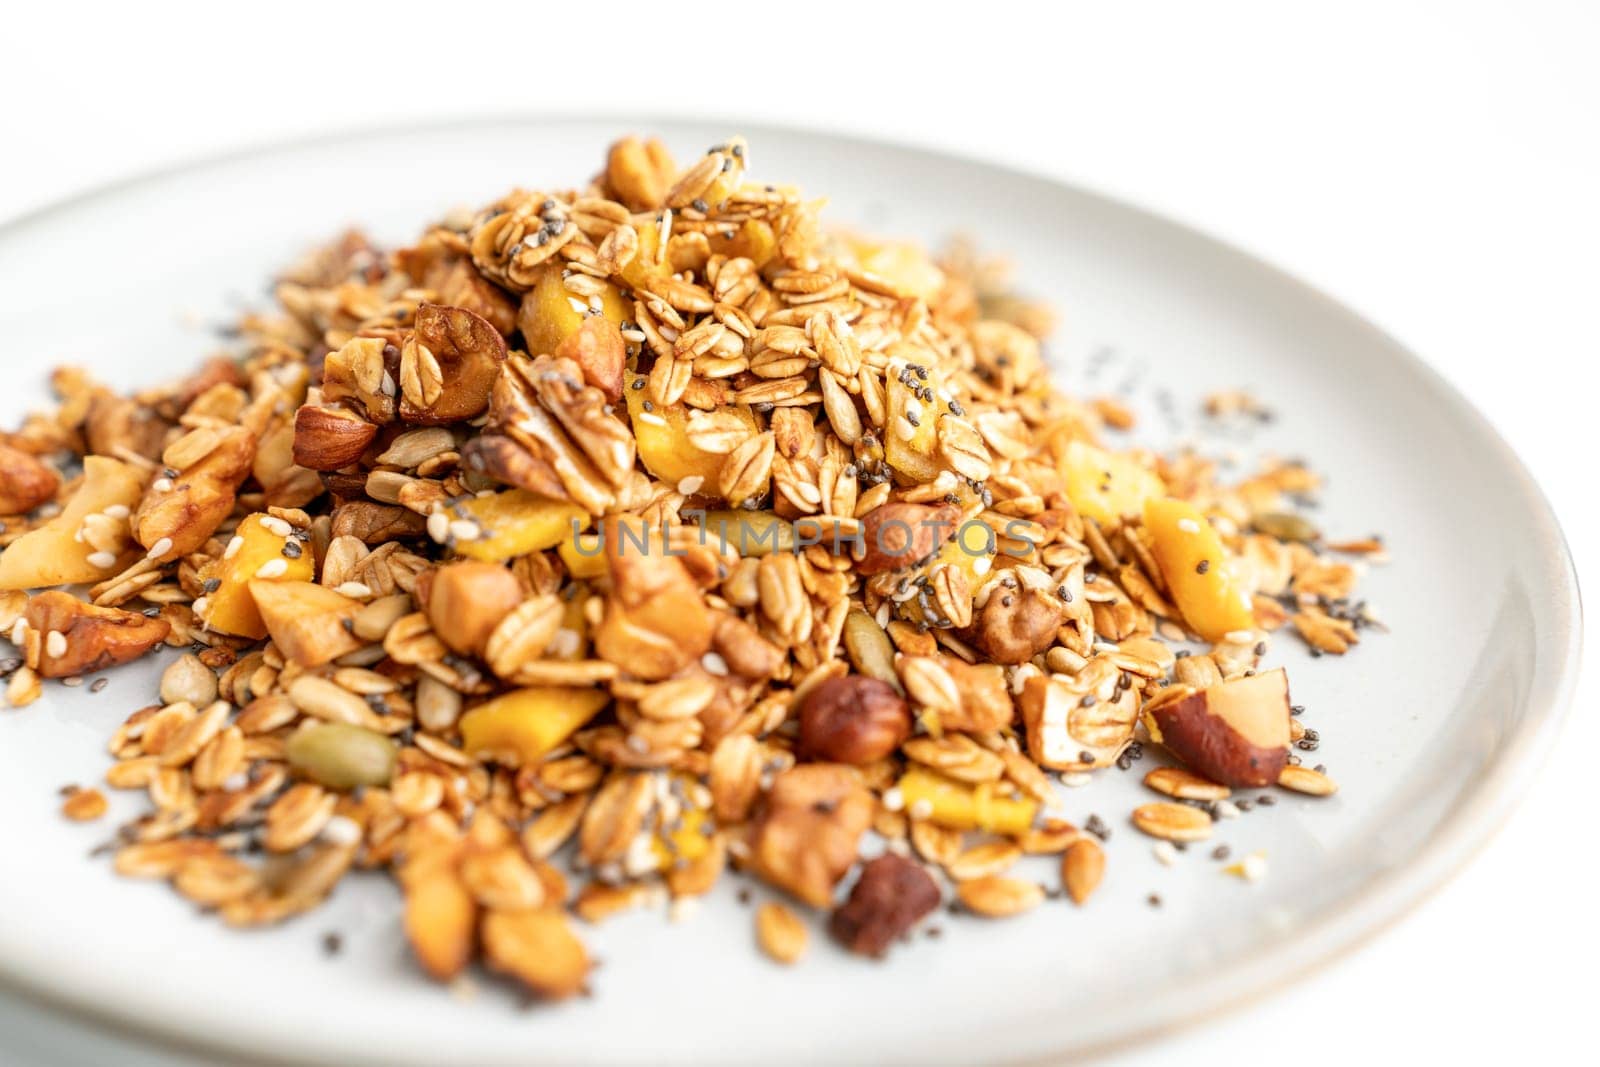 A bowl of granola with nuts and seeds on a white plate. The granola is a mix of different types of grains and nuts, and it looks like a healthy snack. by Matiunina